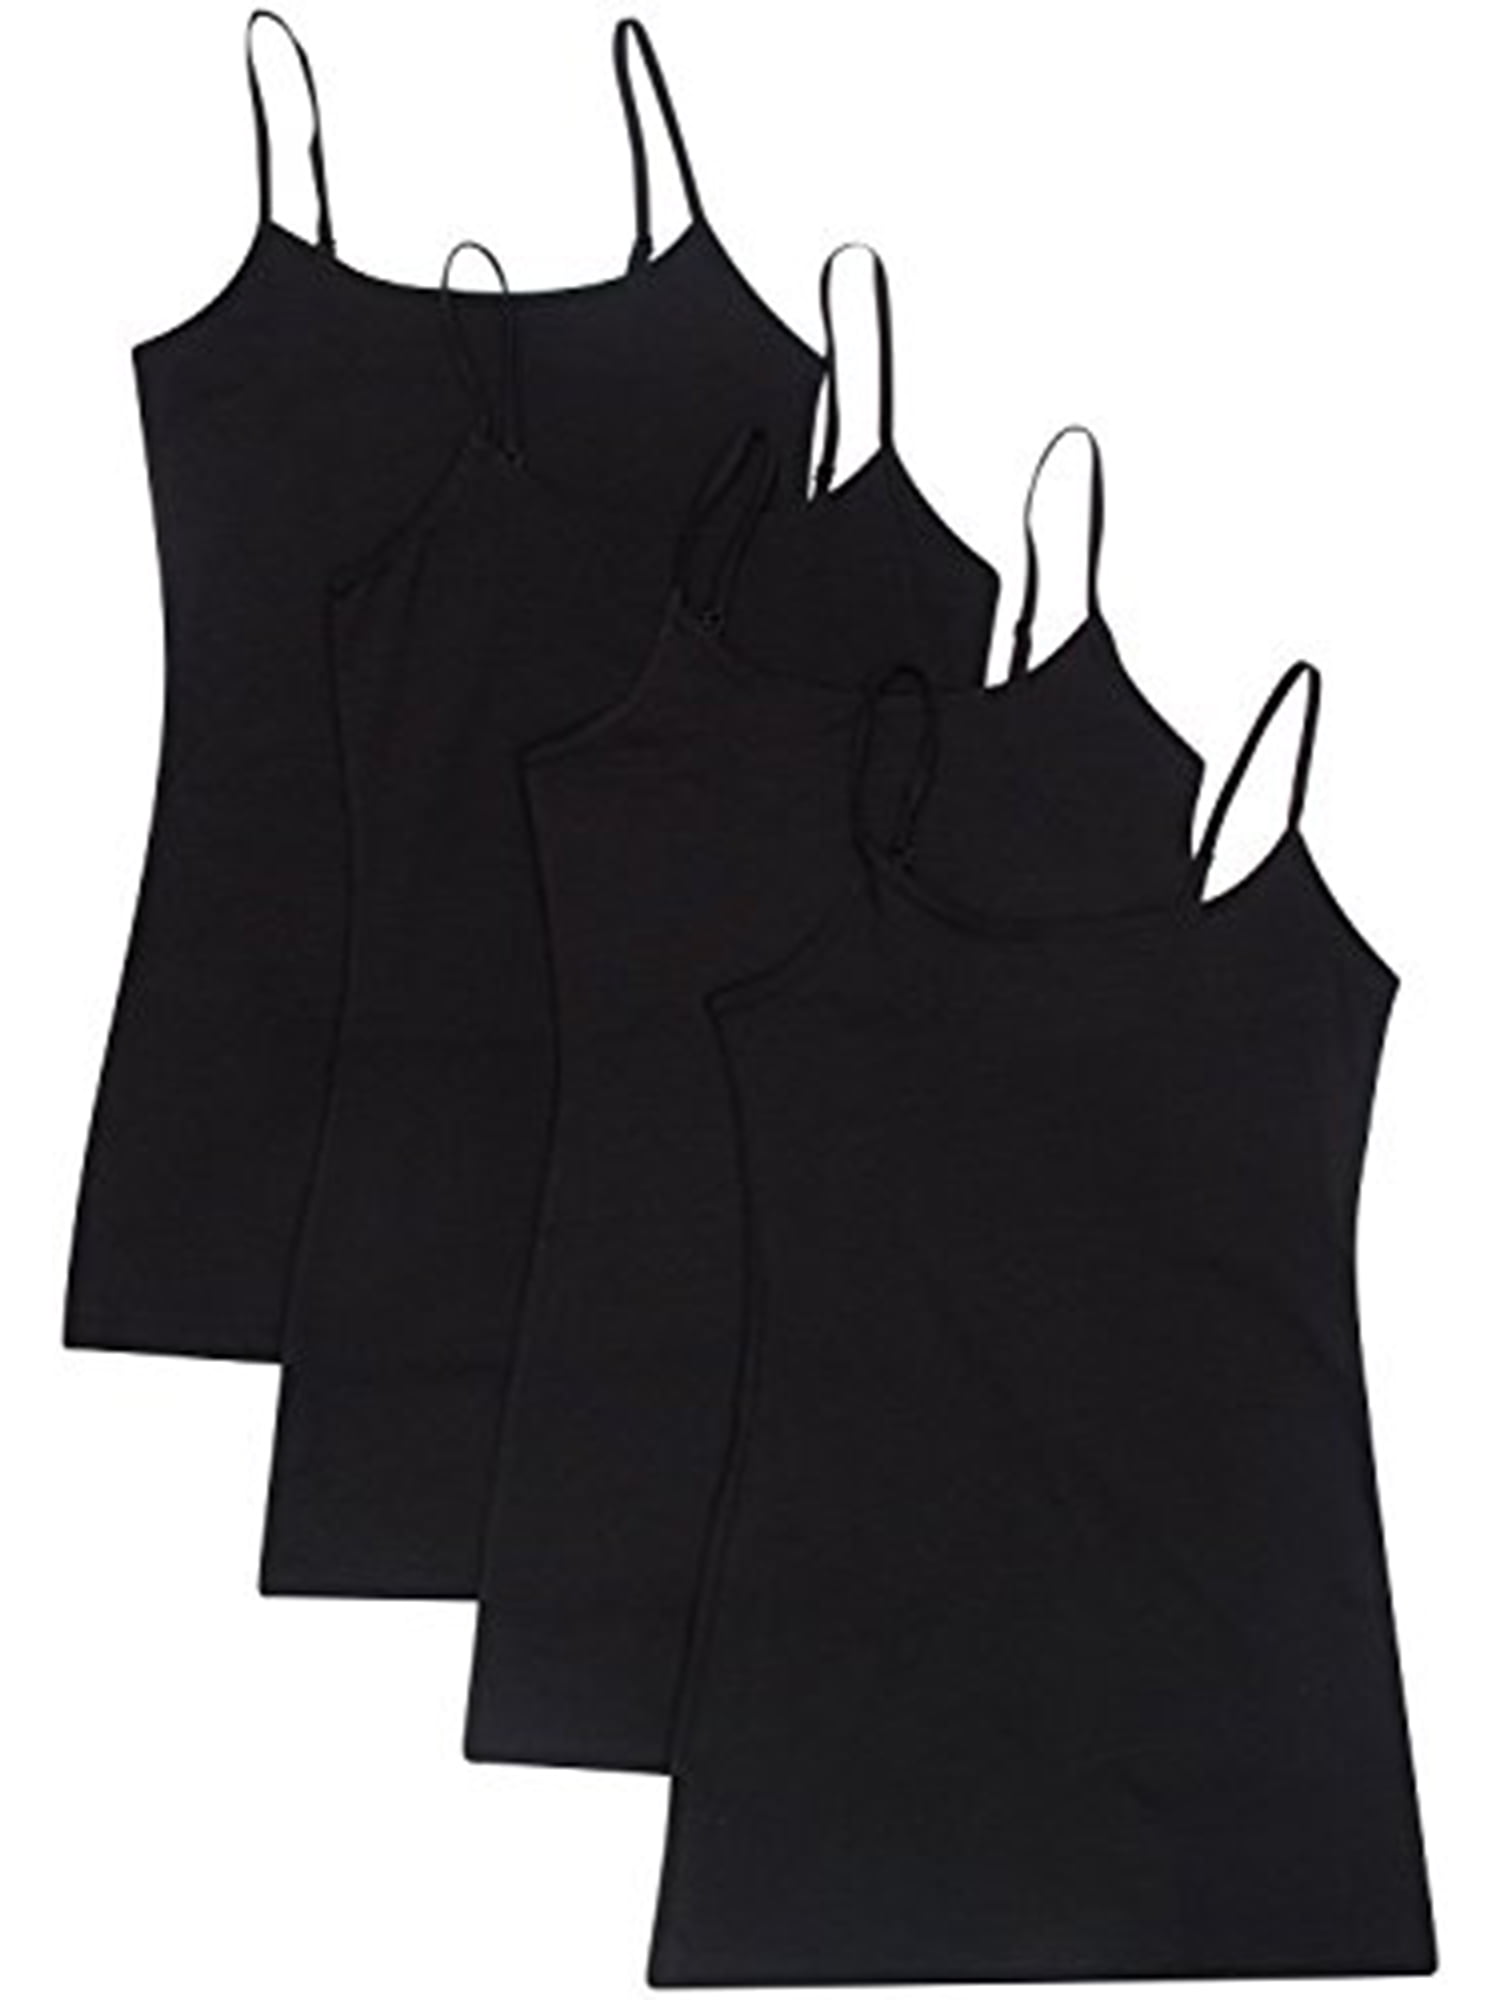 Essential Basic Women Value Pack Long Camisole Cami - Black, Black, Black,  Black, Large